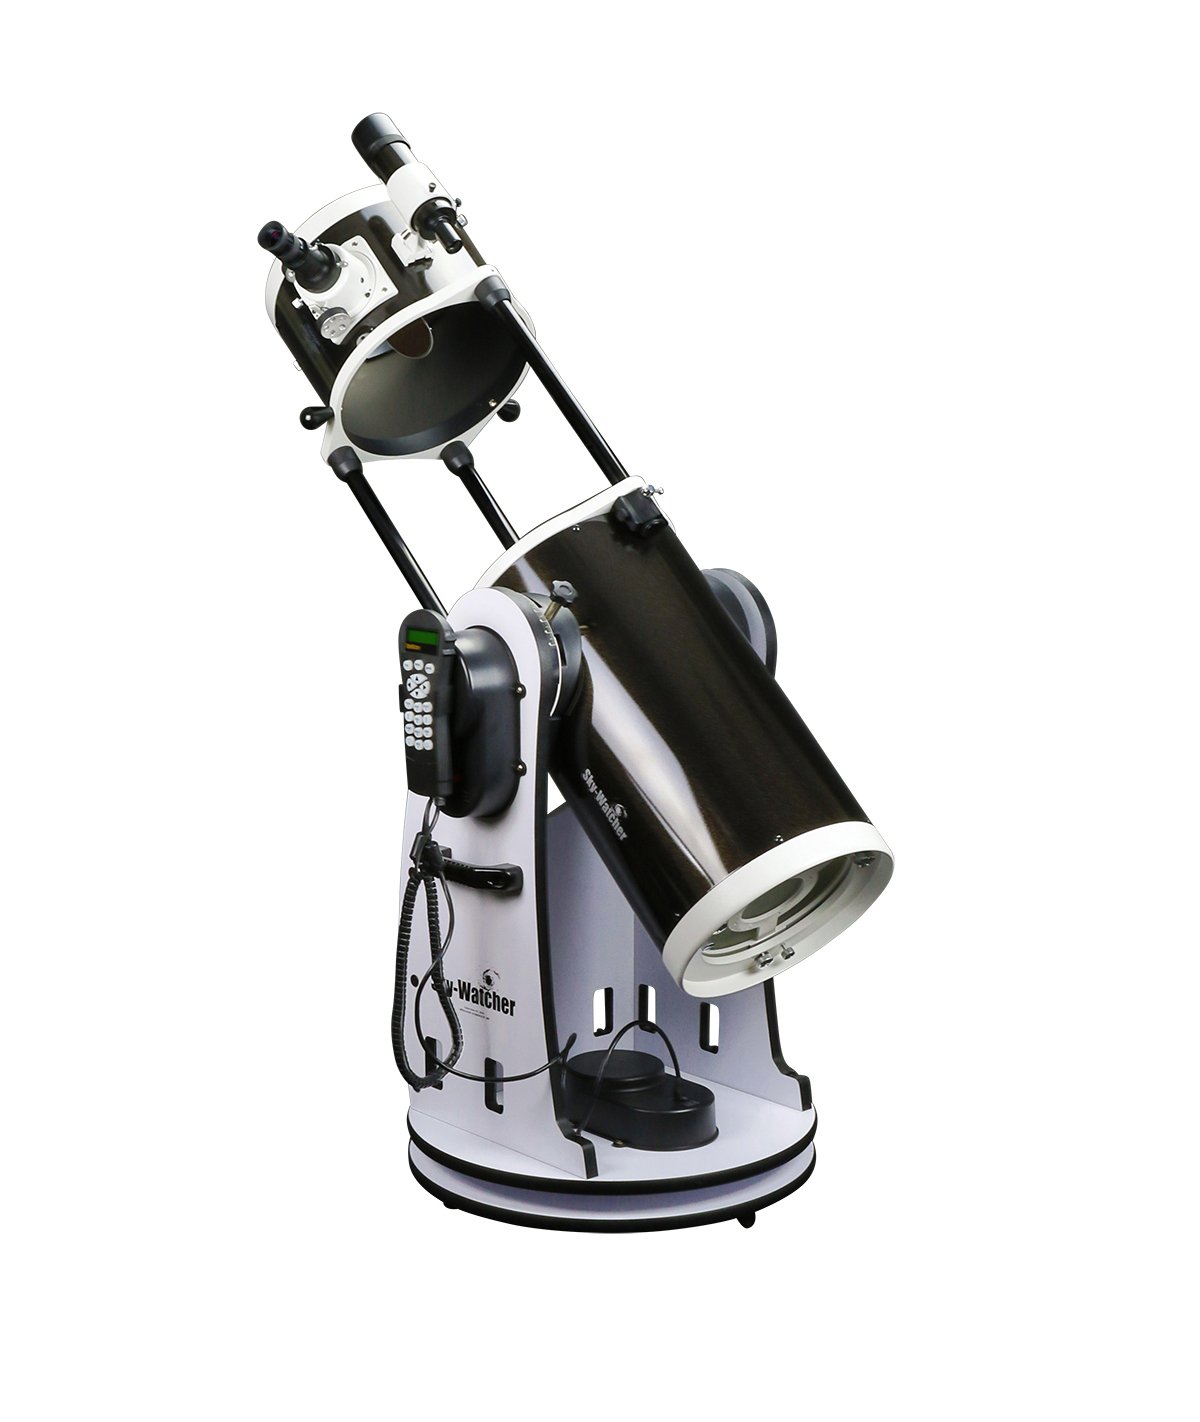 Sky Watcher Sky-Watcher Flextube 250 SynScan Dobsonian 10-inch Collapsible Computerized GoTo Large Aperture Telescope, White, (S11810)